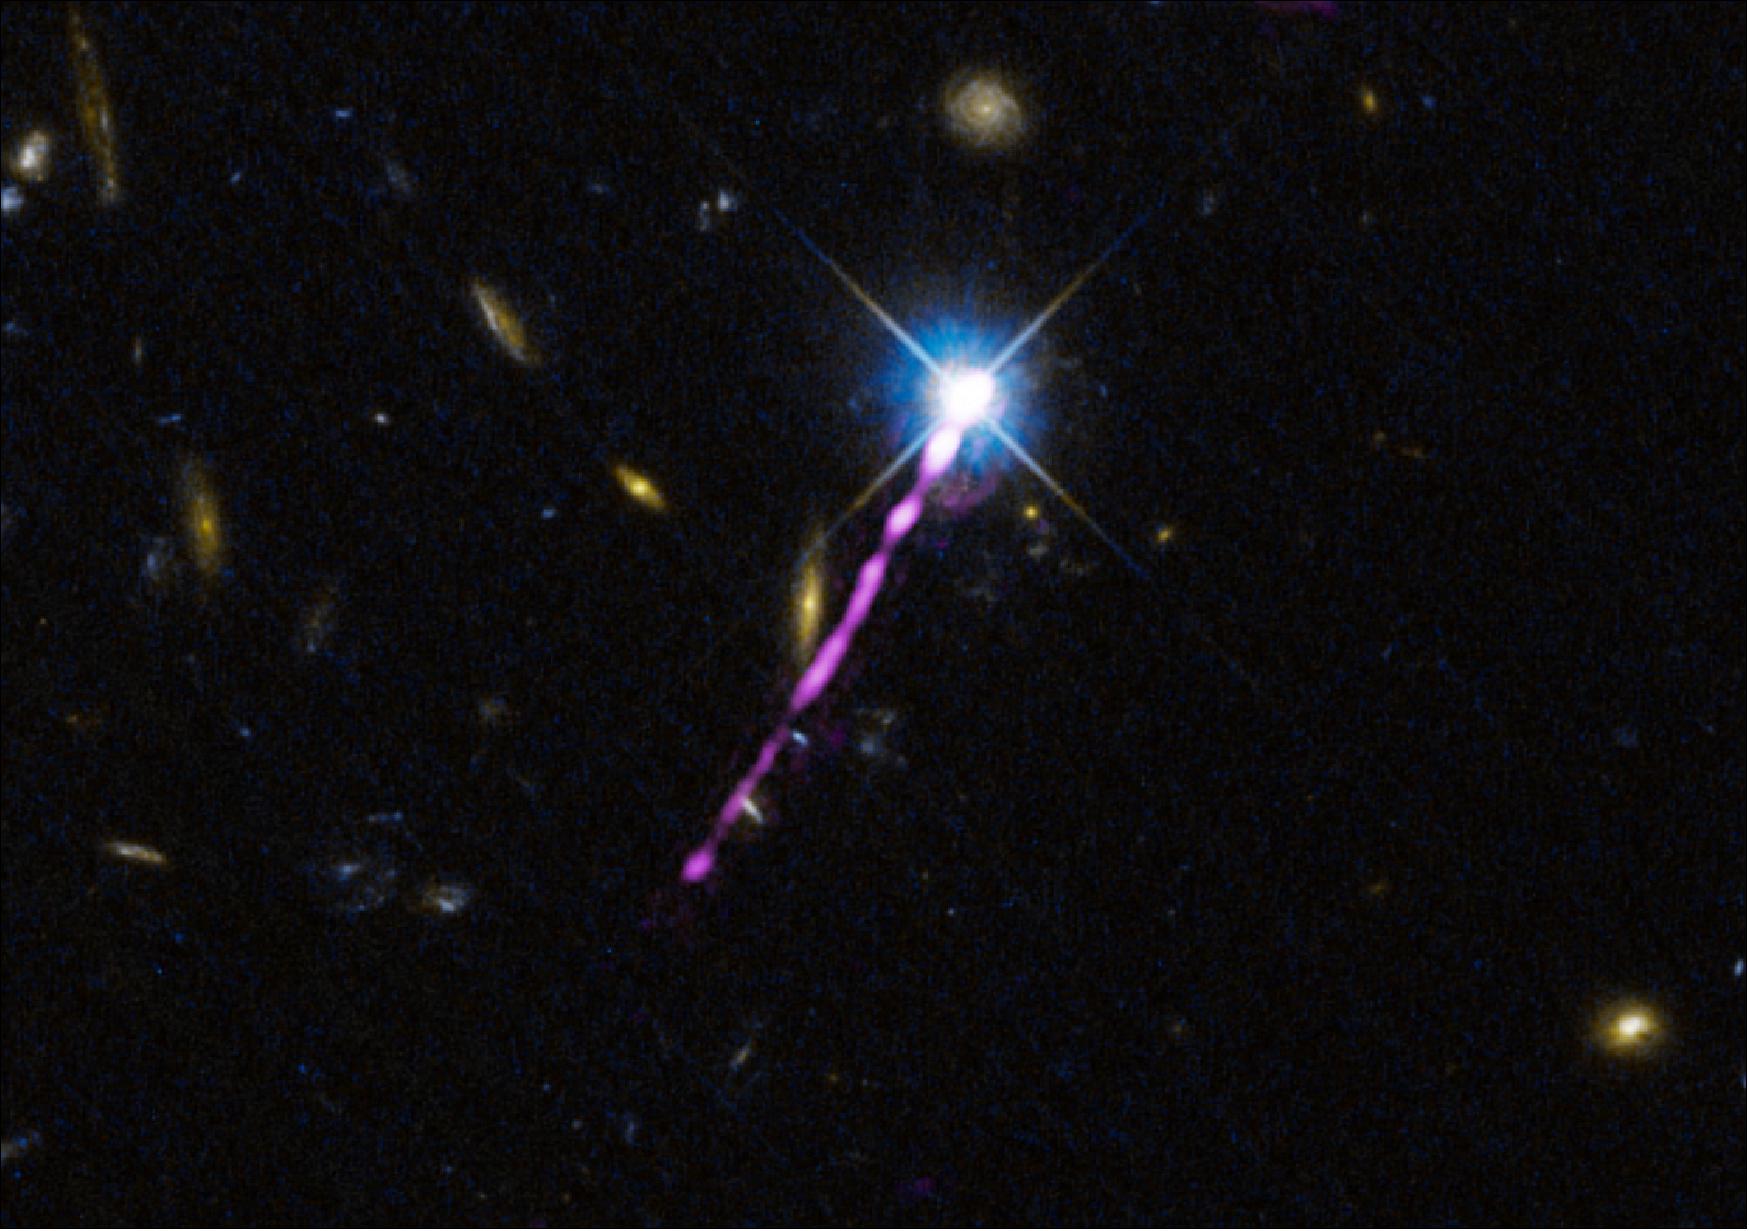 Figure 17: The radio jet of the quasar 4C+19.44, powered by a supermassive black hole lying in the center of its host galaxy and shining at long radio wavelengths as seen by the LOFAR radio telescope (magenta). The background image shows neighboring galaxies in the visible light highlighted thanks to the Hubble Space Telescope (cyan and orange) having the radio jet passing into the dark voids of intergalactic space (Harris et al. 2019), image credit: NASA/HST/LOFAR, courtesy of J. DePasquale